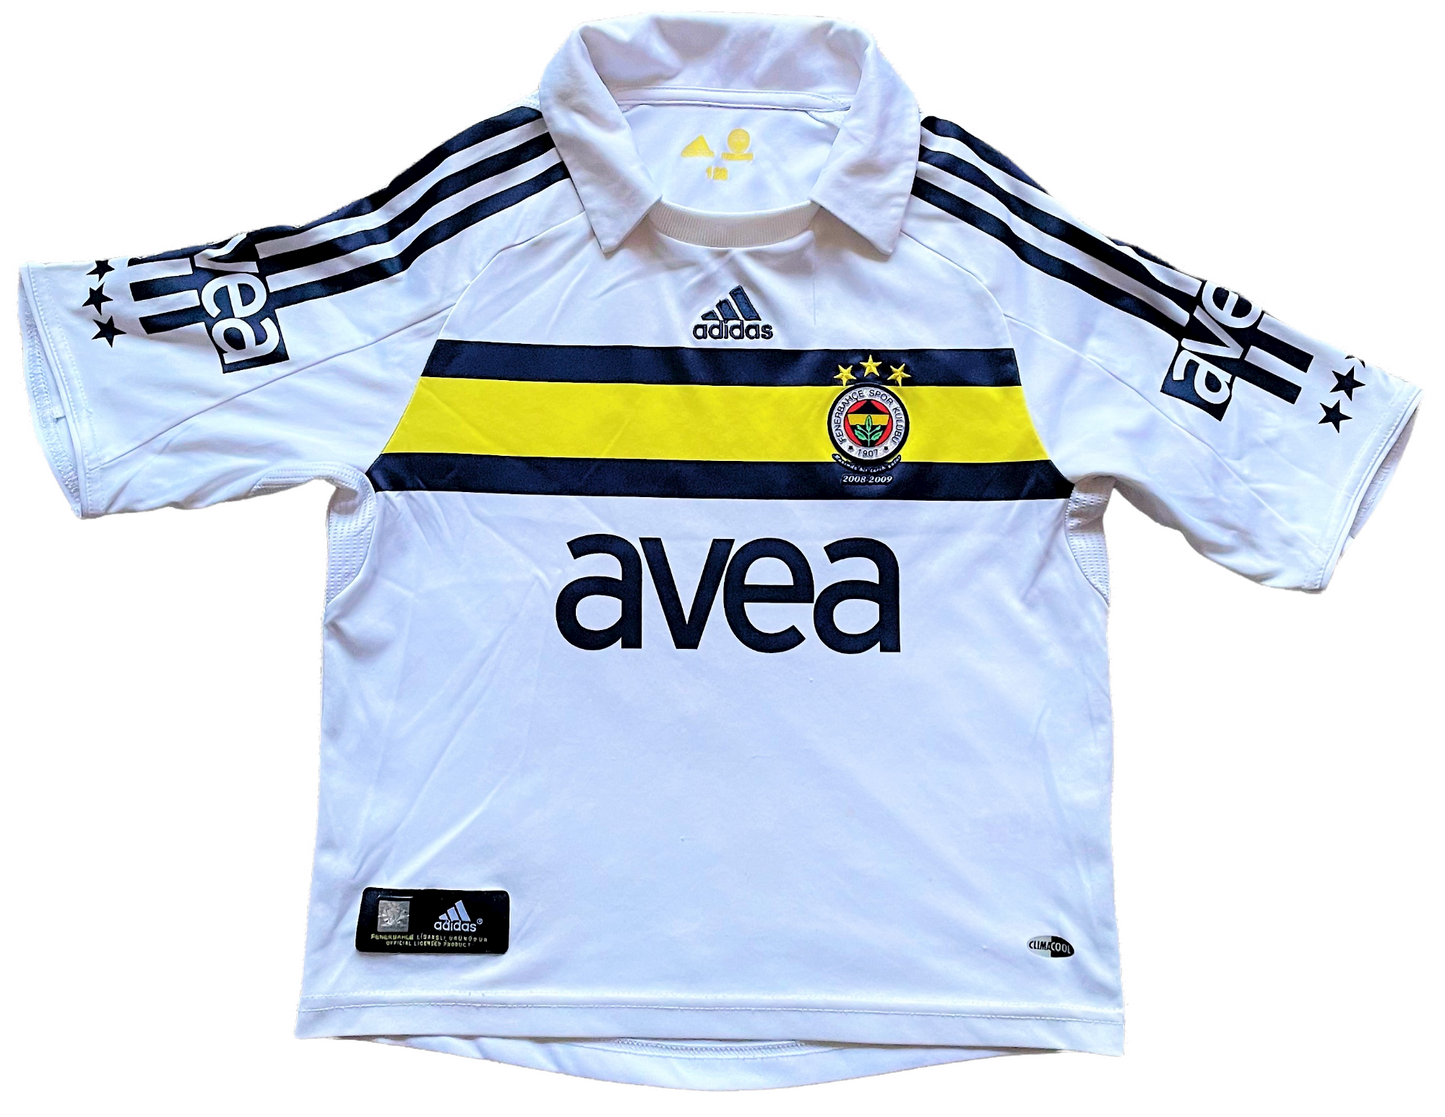 2008-09 Fenerbahce Fourth Shirt (good) Childs size 128. 6 to 8 years